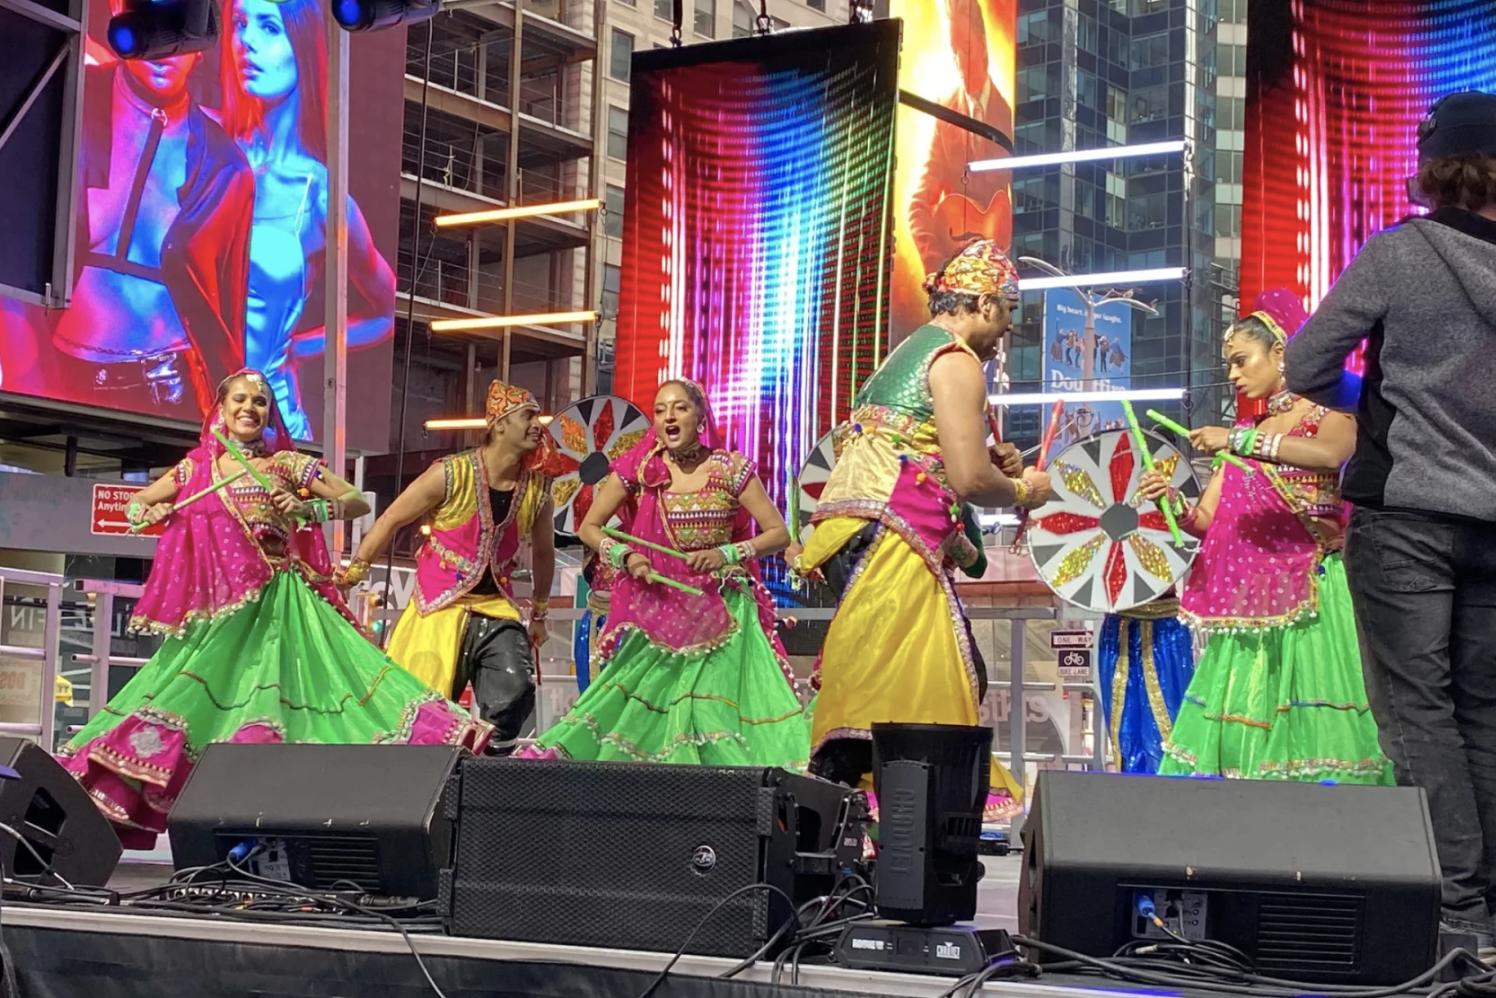 Diwali gains support to become a school holiday in New York and across the U.S.